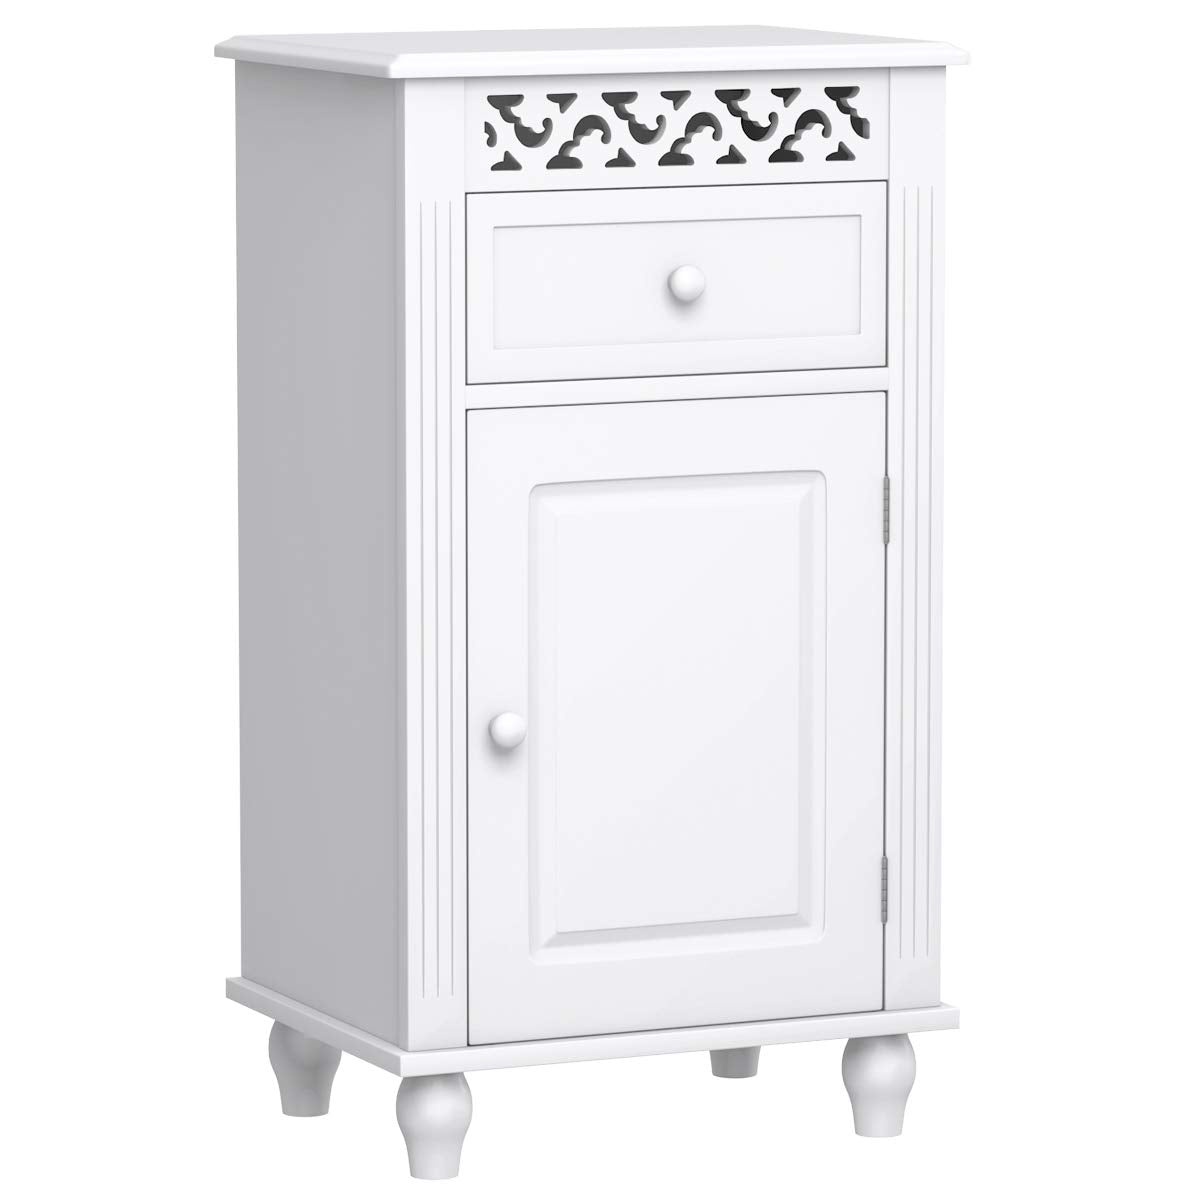 Giantex Storage Floor Cabinet W/One Cabinet Two-Layer Adjustable Shelves & One Drawer Wood Bathroom Cupboard Organizer Kitchen Collection Cabinet Shelf Nightstand Beside End Table White (1 Drawer)